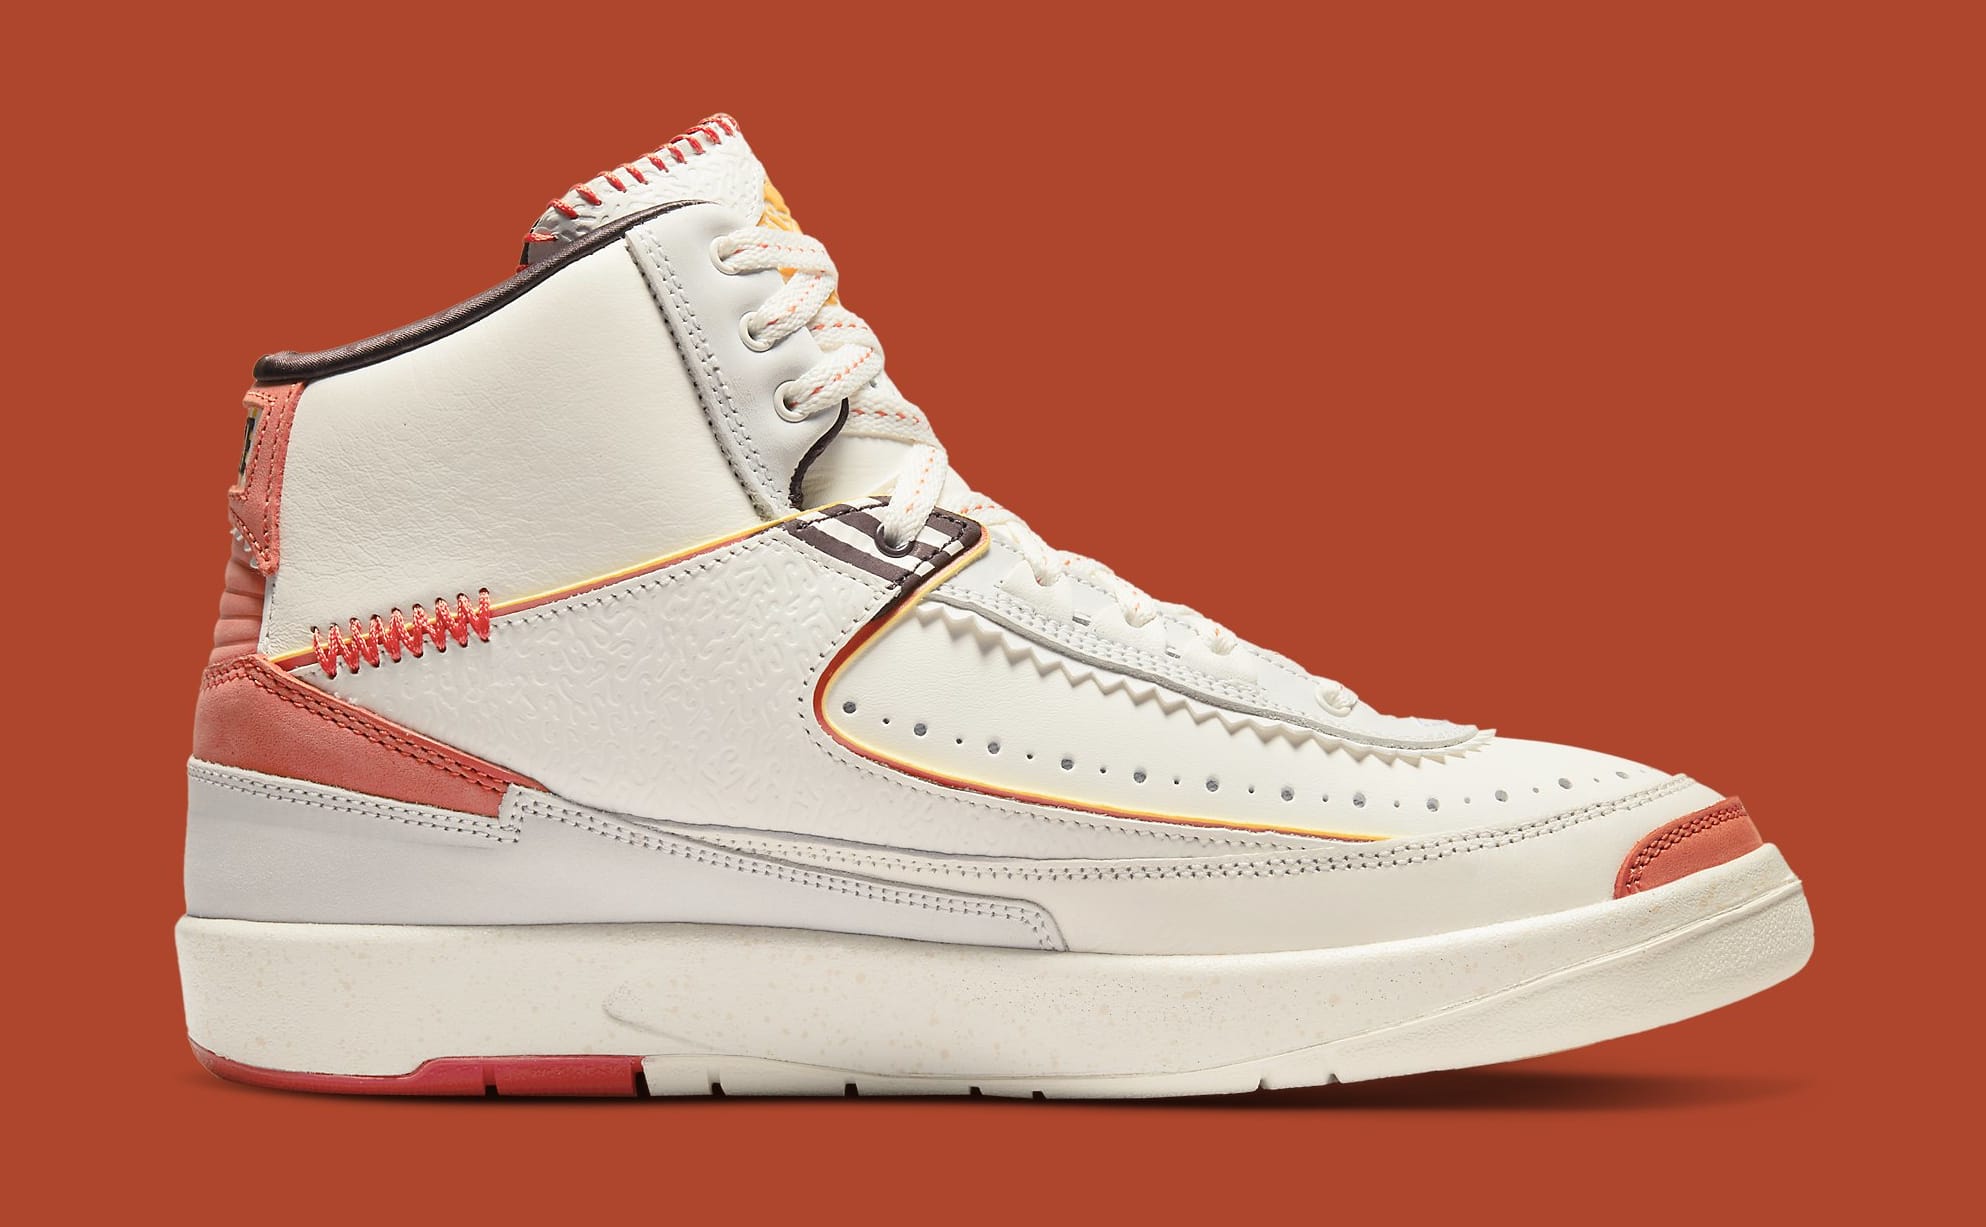 Maison Chateau Rouge's Air Jordan 2 Collab Is Releasing in June